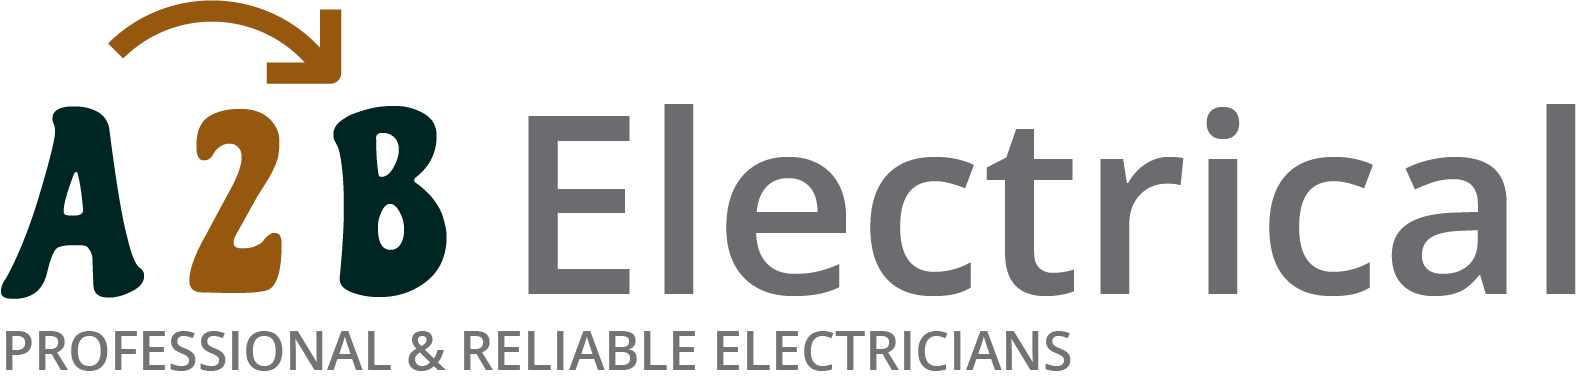 If you have electrical wiring problems in Bushey, we can provide an electrician to have a look for you. 